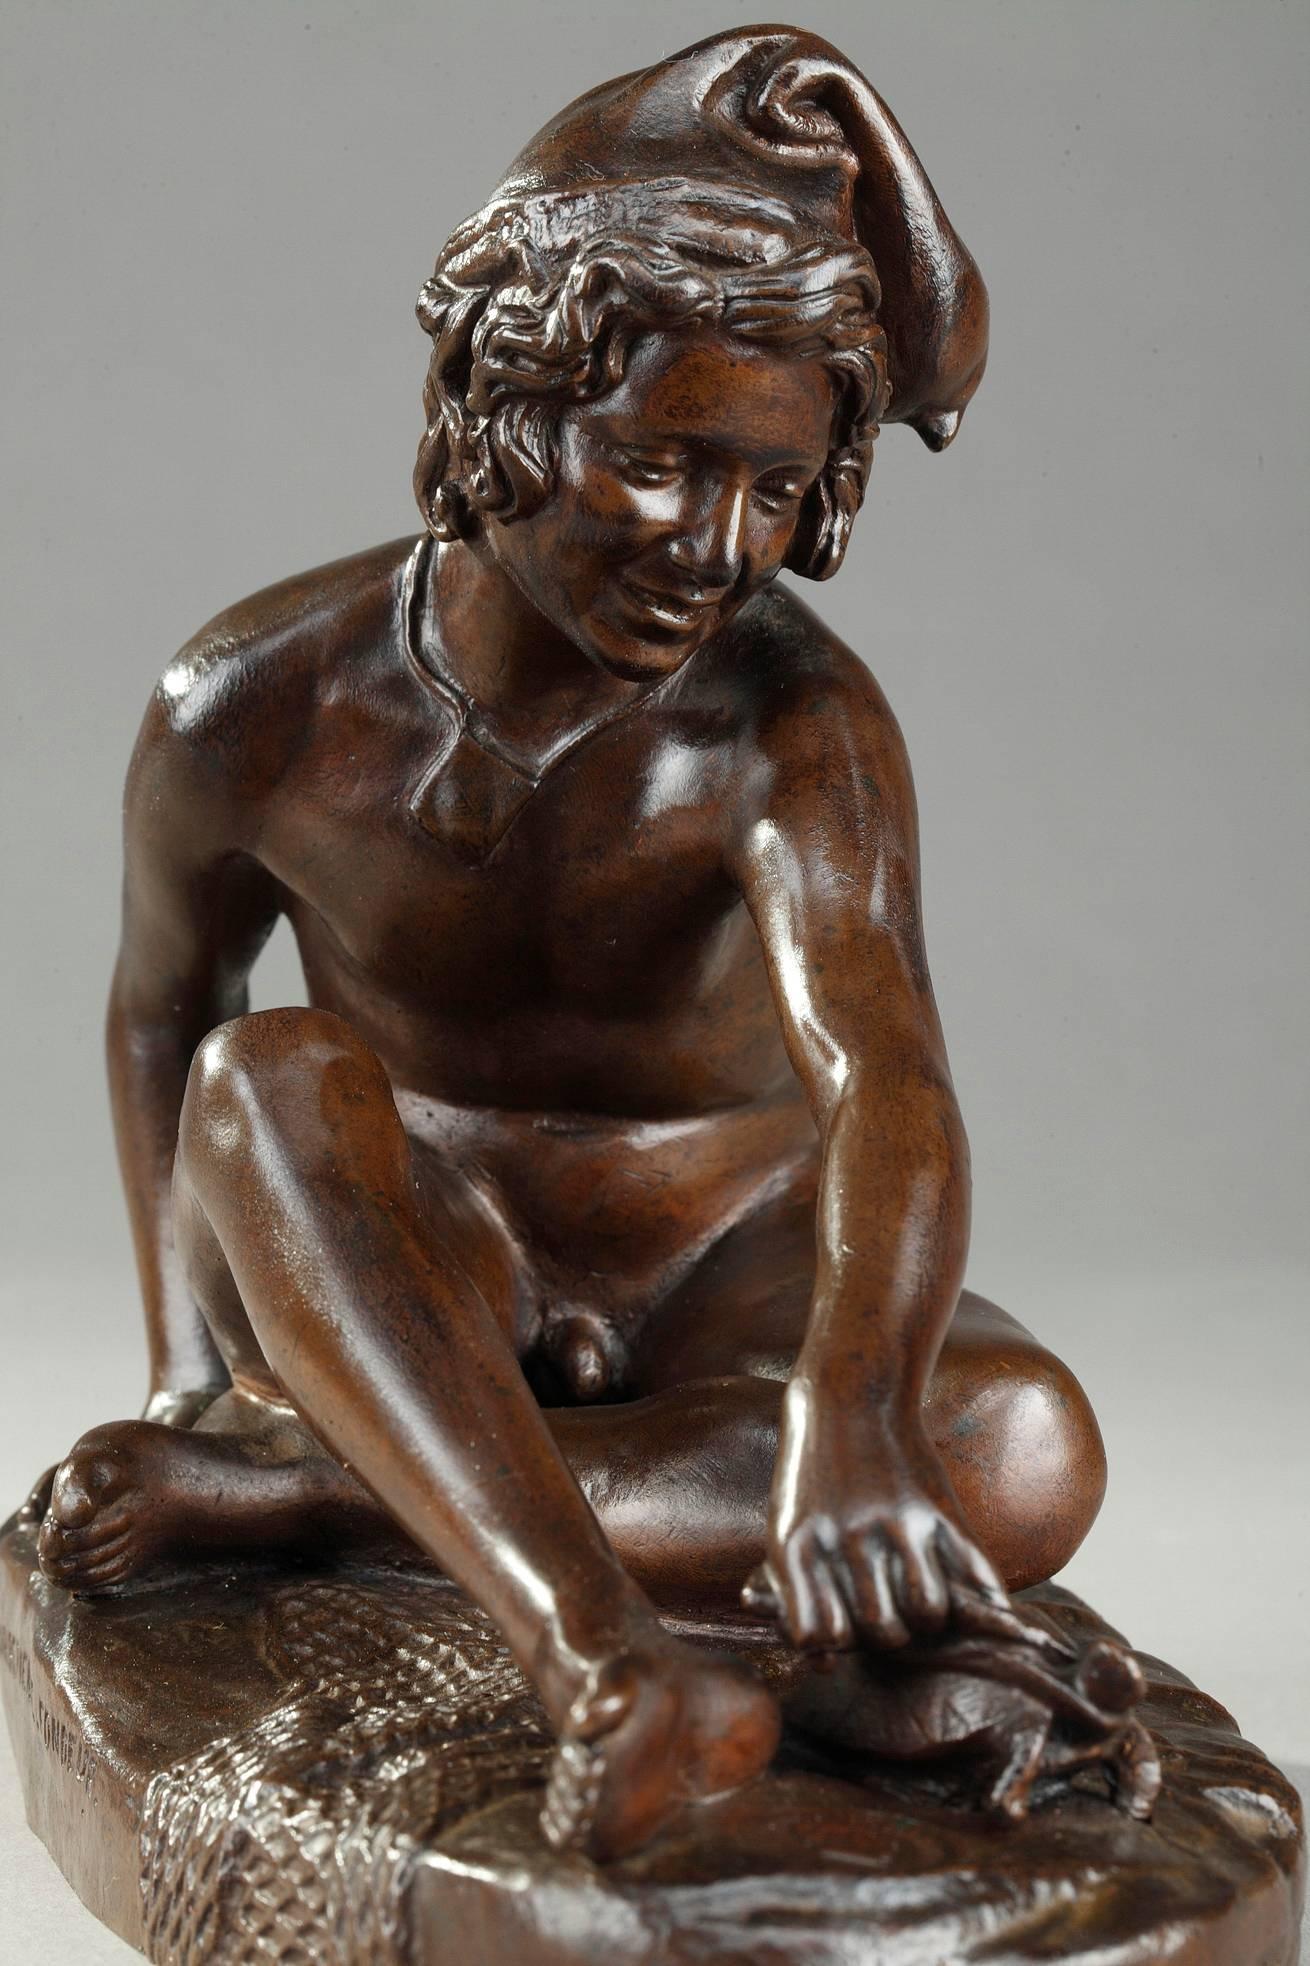 Mid-19th century bronze sculpture with brown patina featuring a cheerful Neapolitan boy playing with a tortoise by the sea. Cast by Ferdinand Barbedienne after François Rude (1784-1855). Marked on the base F. BARBEDIENNE FONDEUR and Reduction